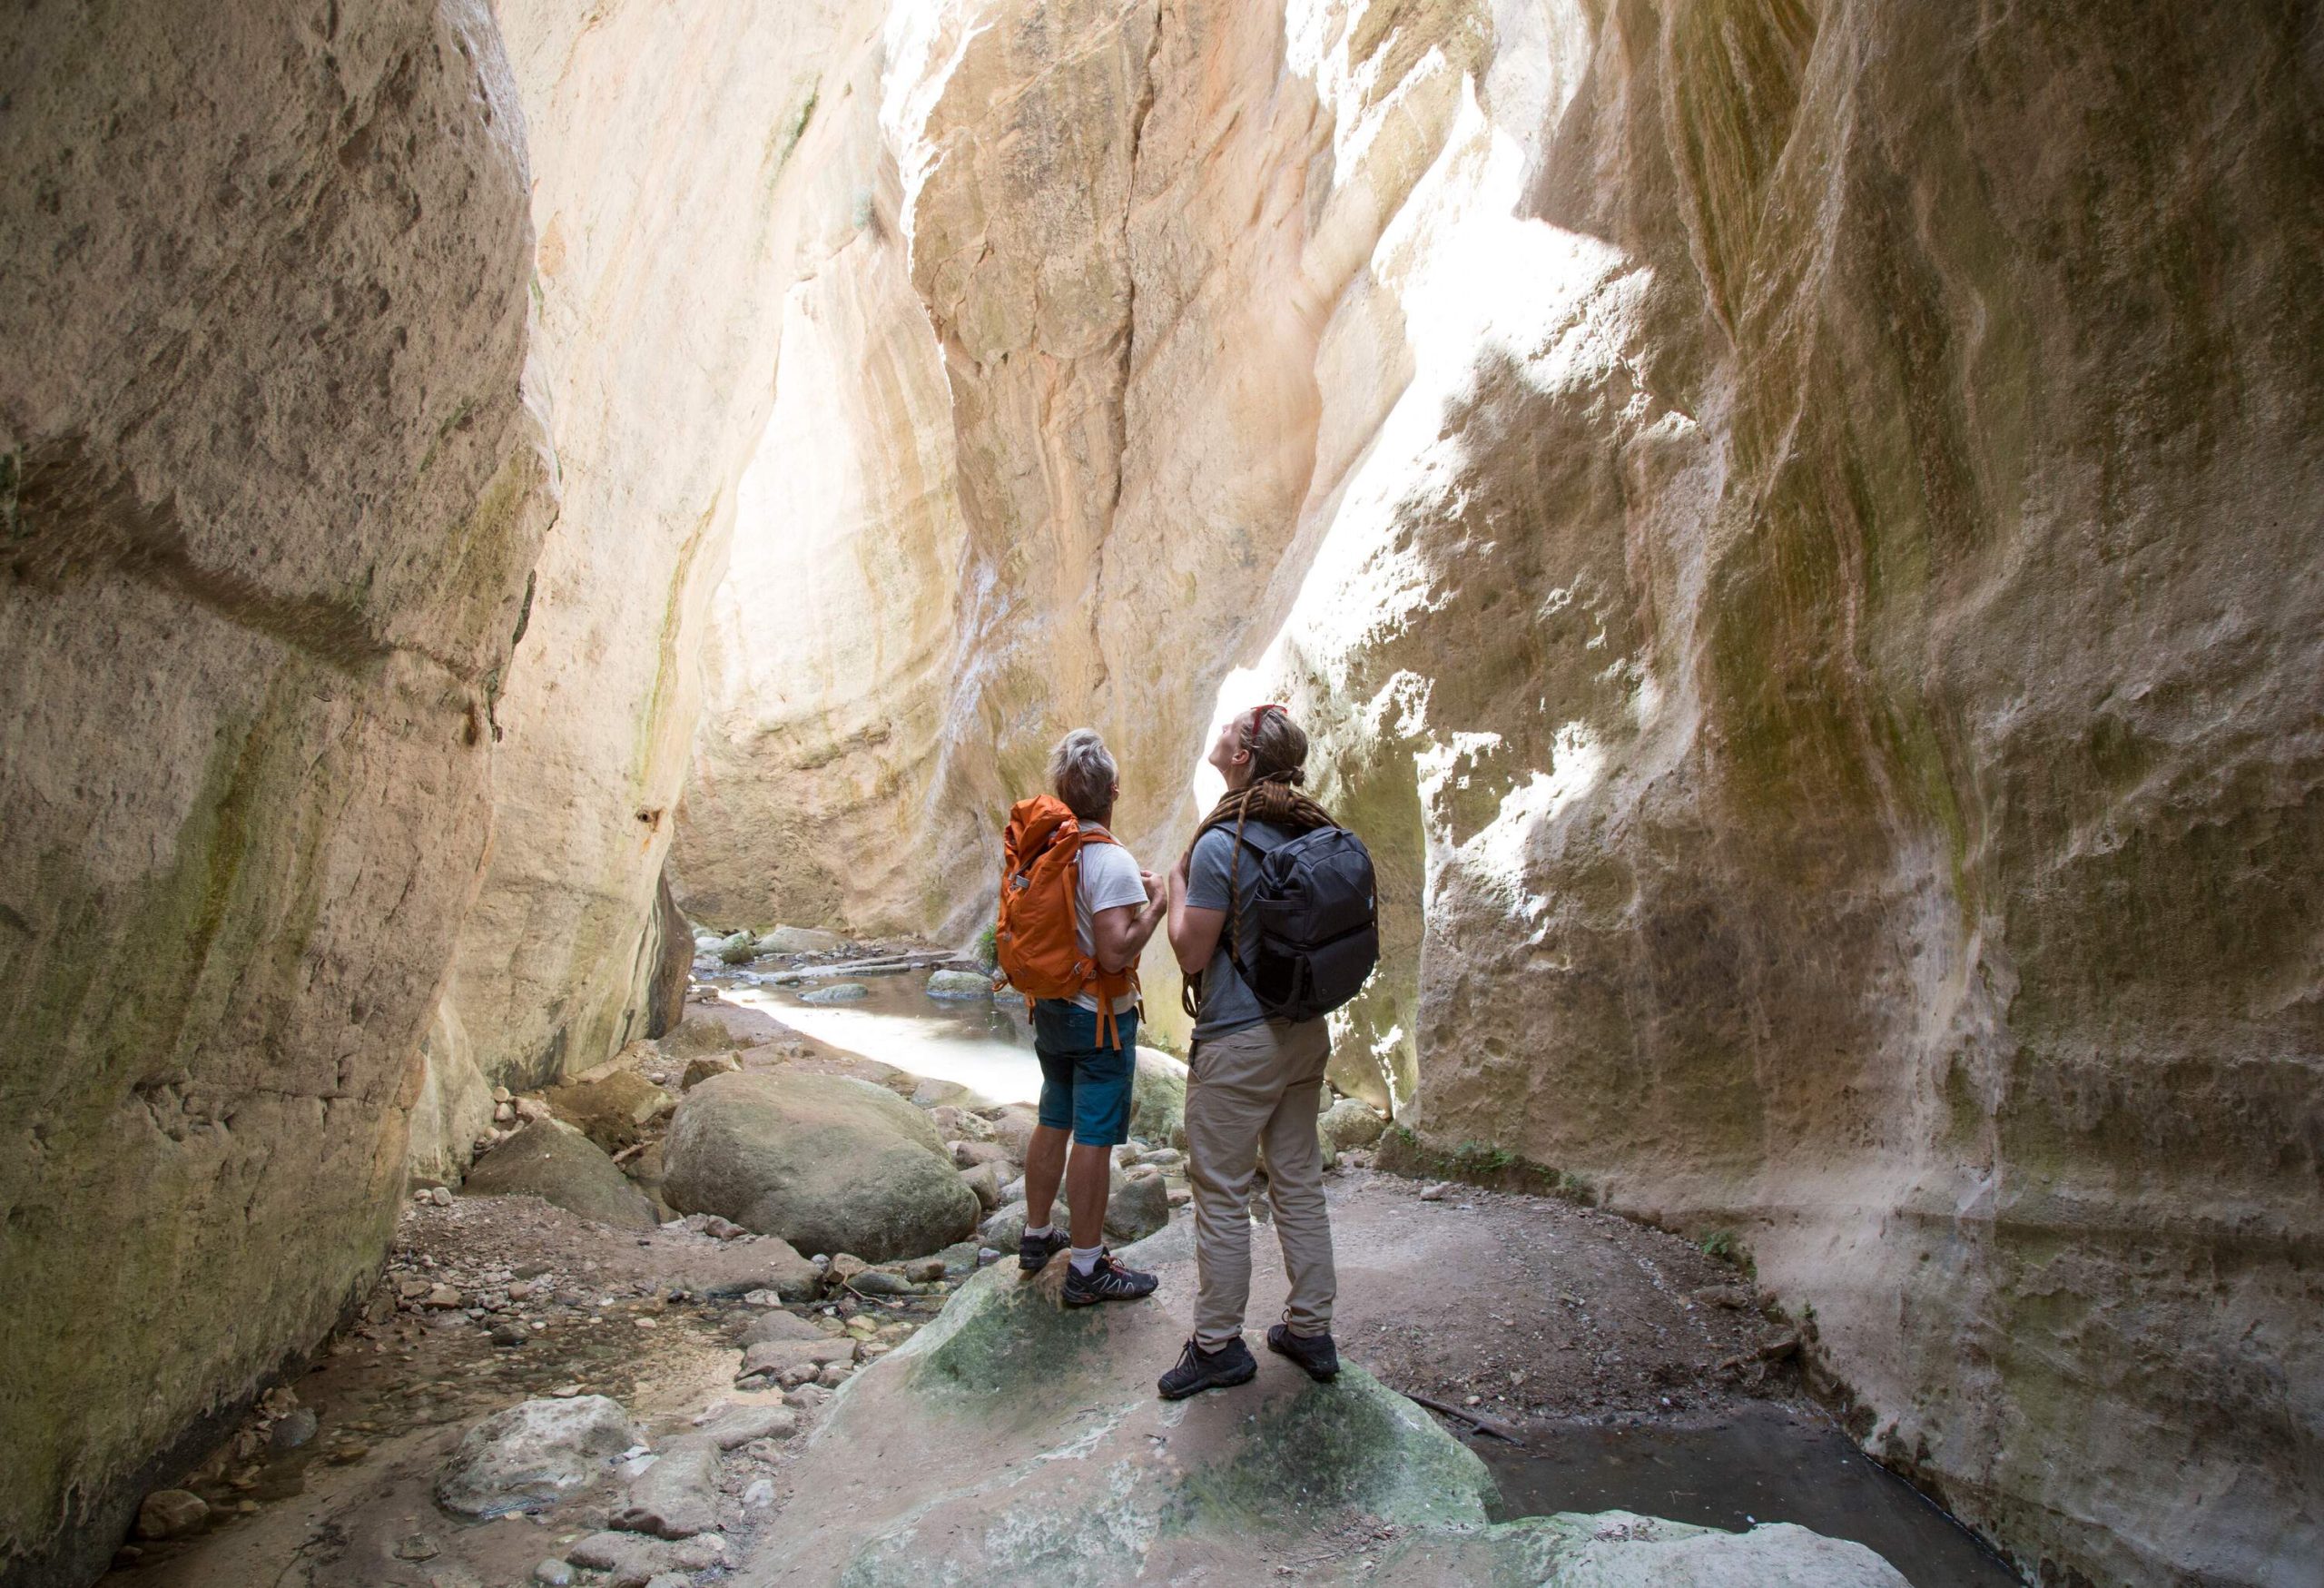 Two male backpackers looking up as they stand inside the gap of rock canyons.